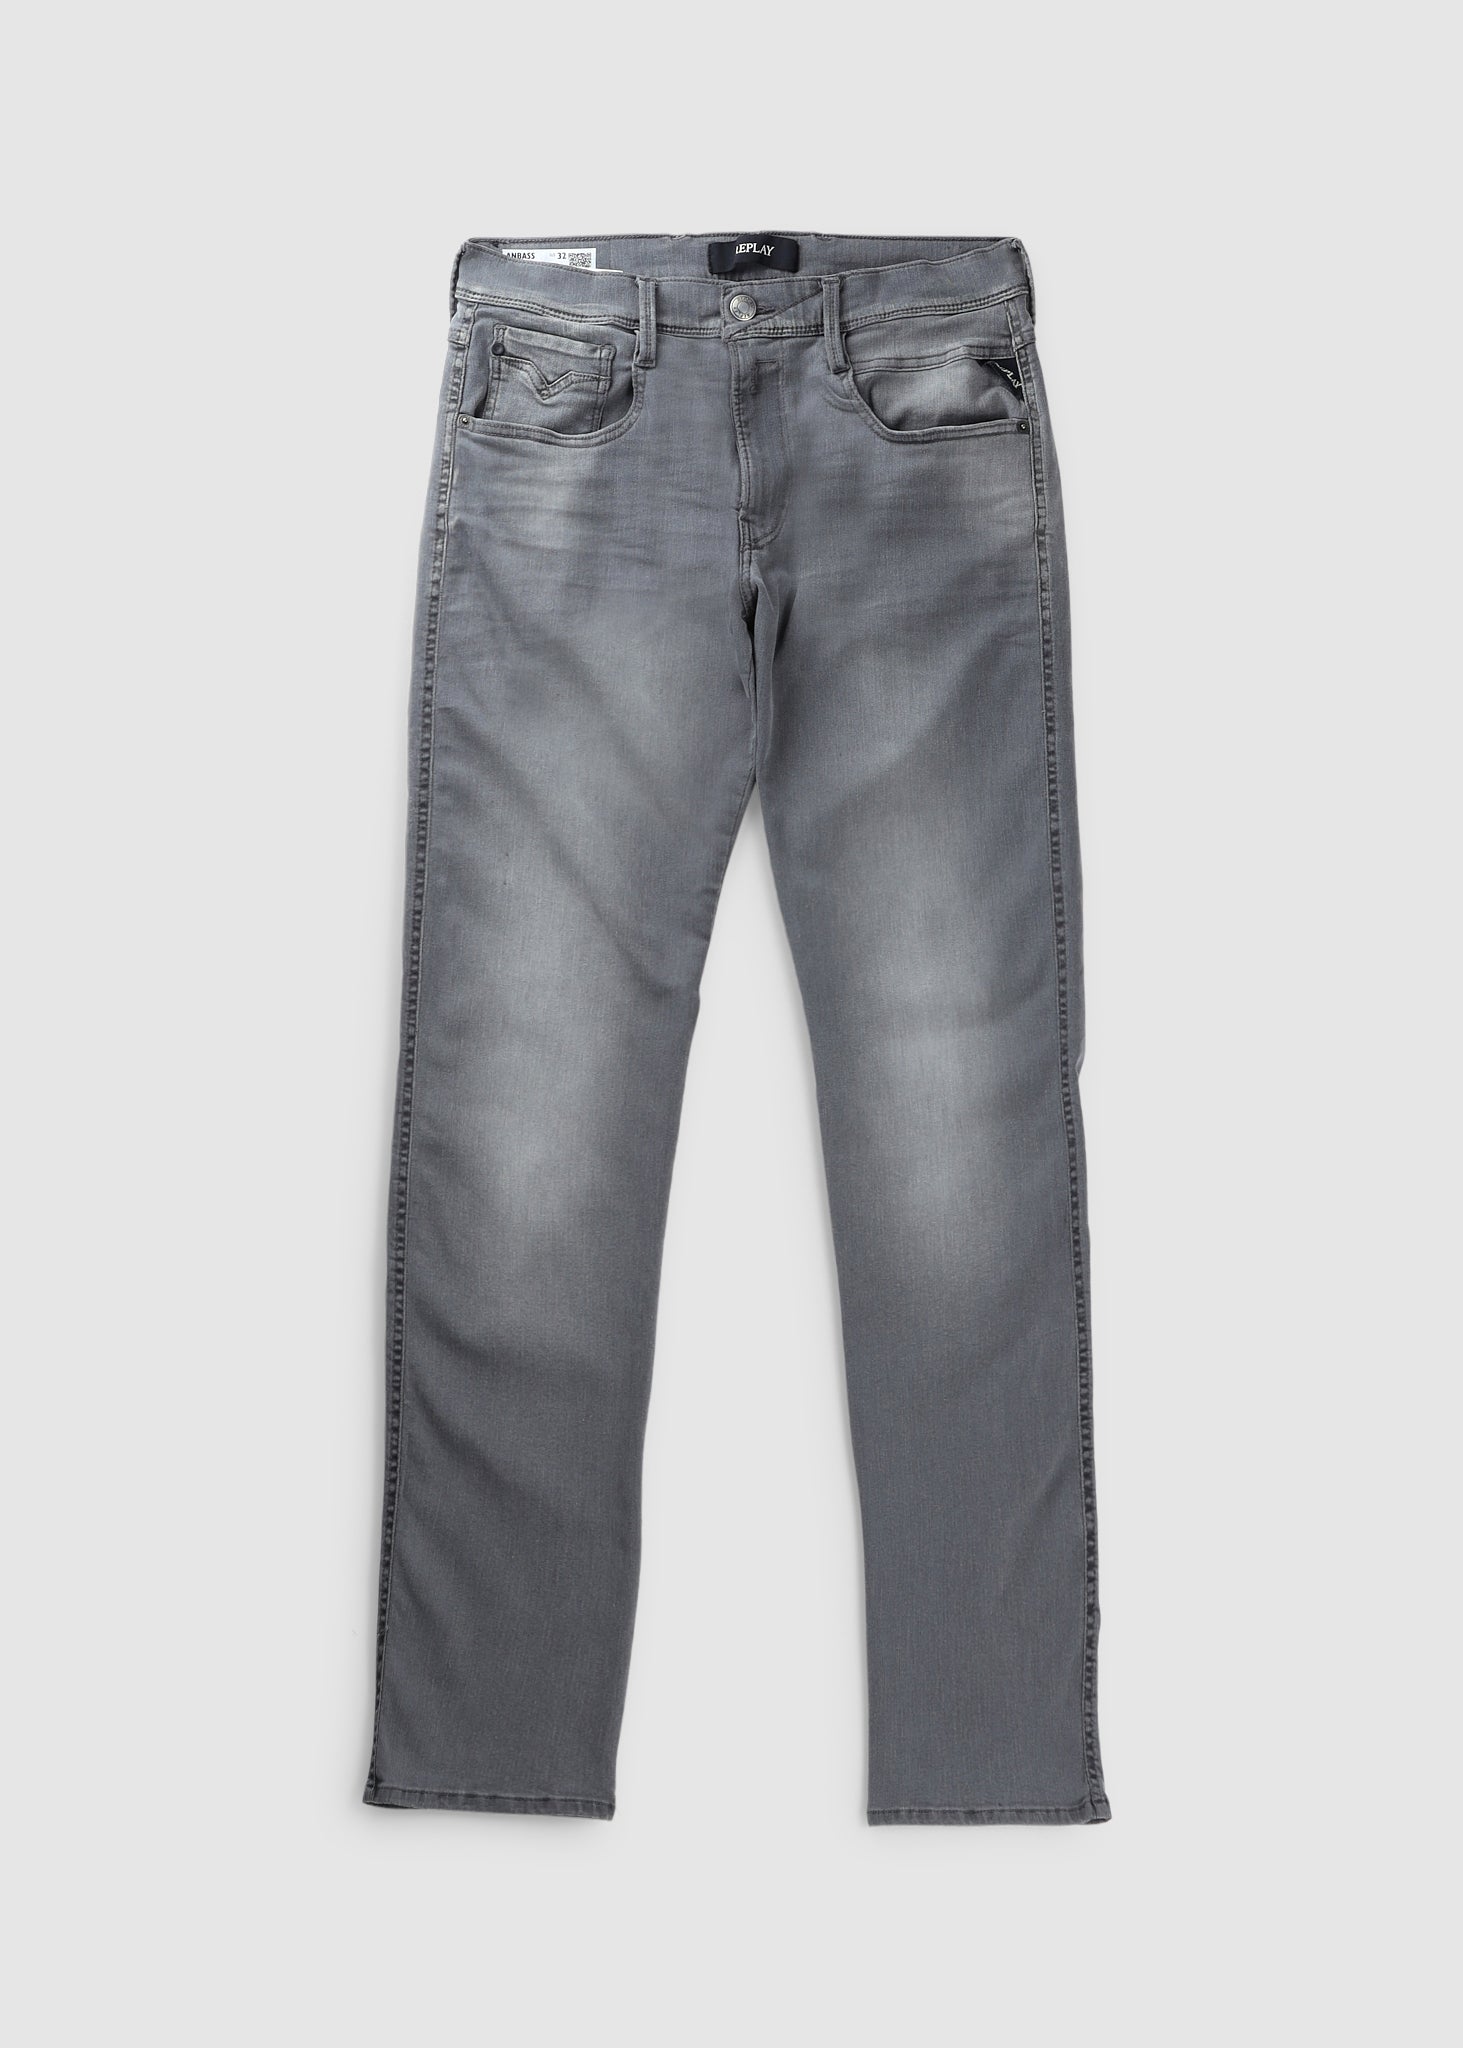 Image of Replay Mens Anbass Hyperflex Jeans In Light Grey